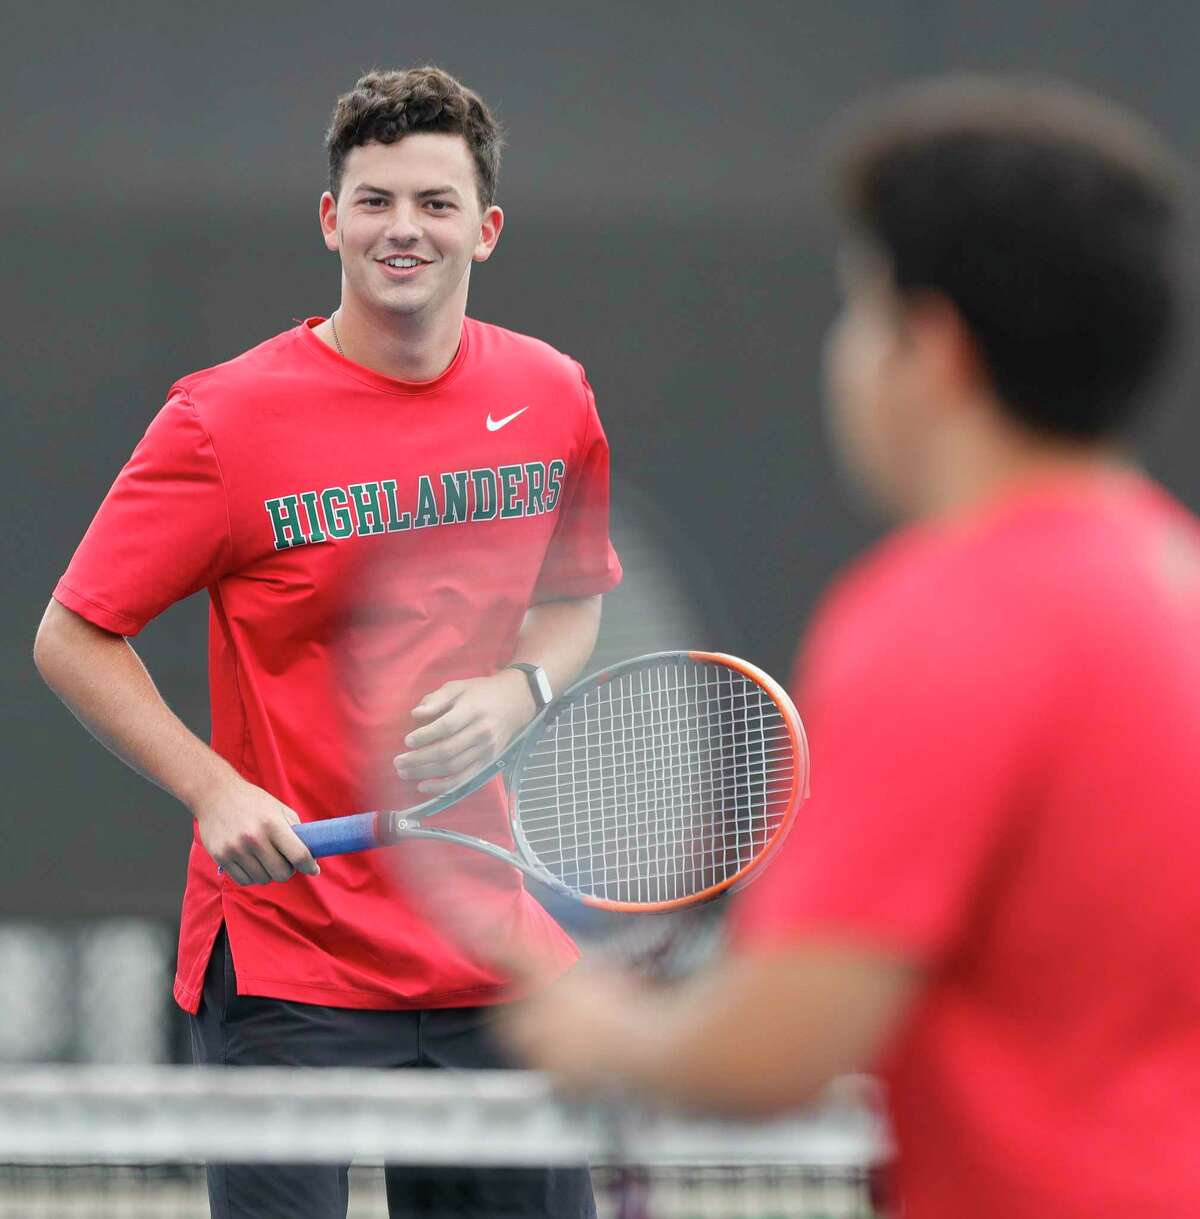 The Woodlands’ Caleb Gills shares a laugh as he warms up before a high school tennis match at Grand Oaks High School, Thursday, Sept. 24, 2020, in Spring.